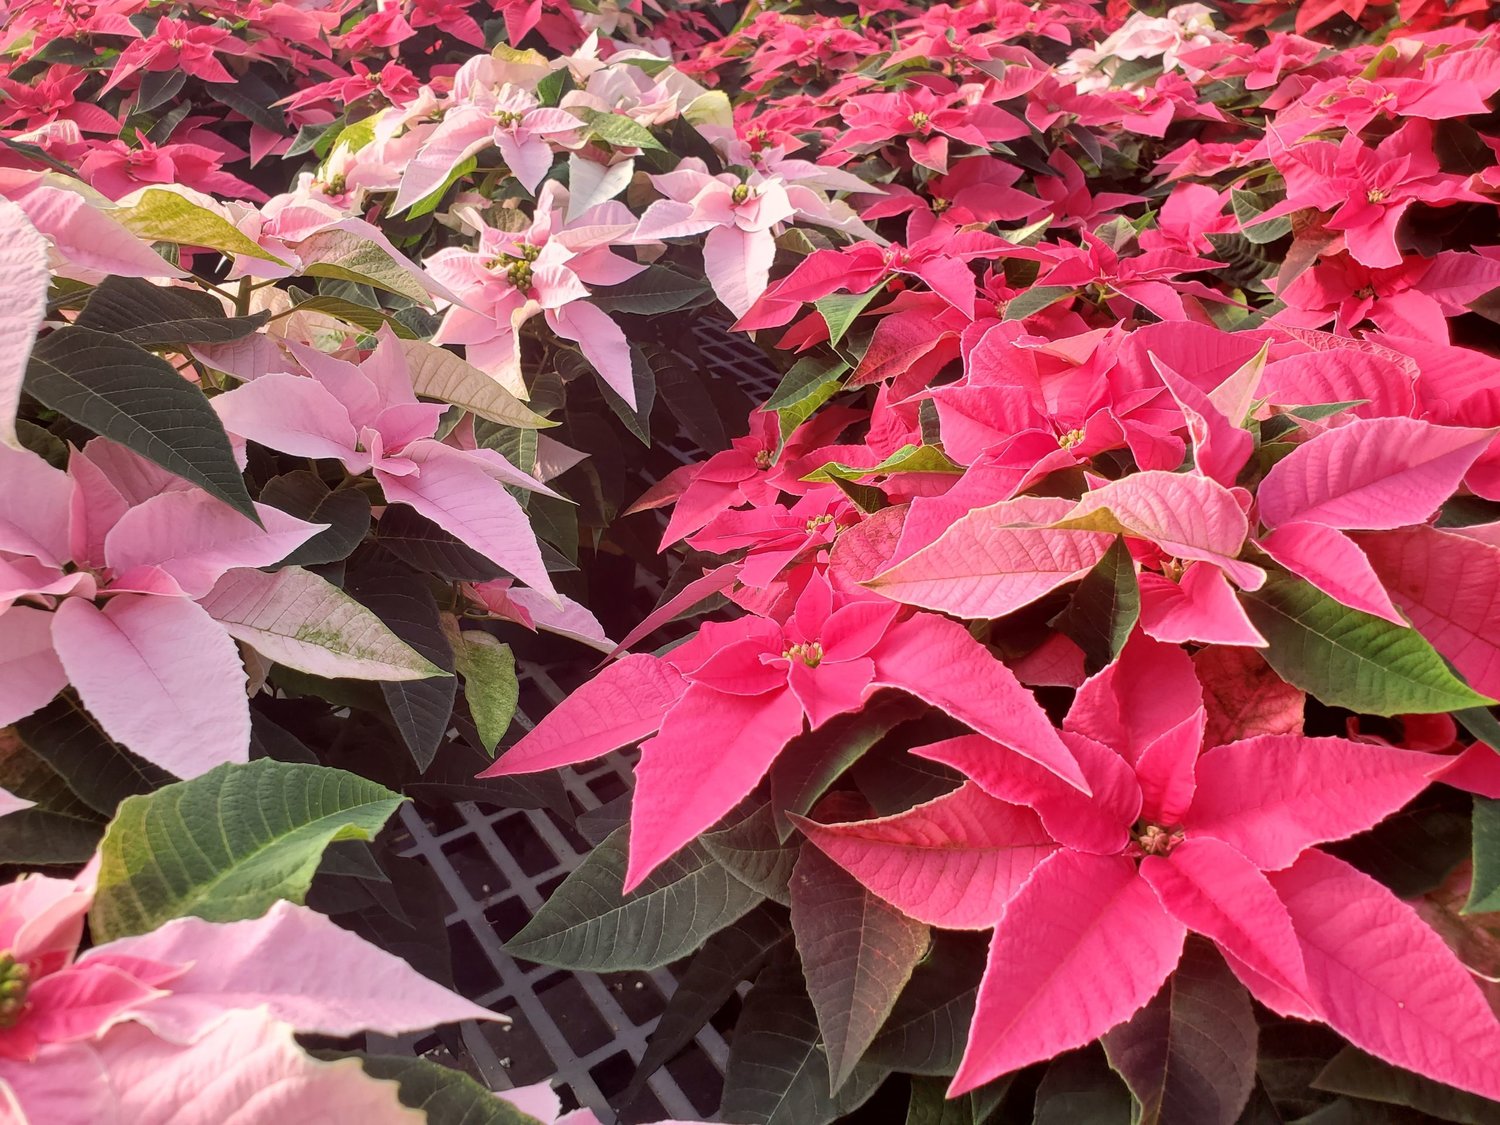 For the merriest of homes: Poinsettias for every holiday color scheme at Bayport Flower Houses (940 Montauk Highway, Bayport). From $8.99 to $62.99.